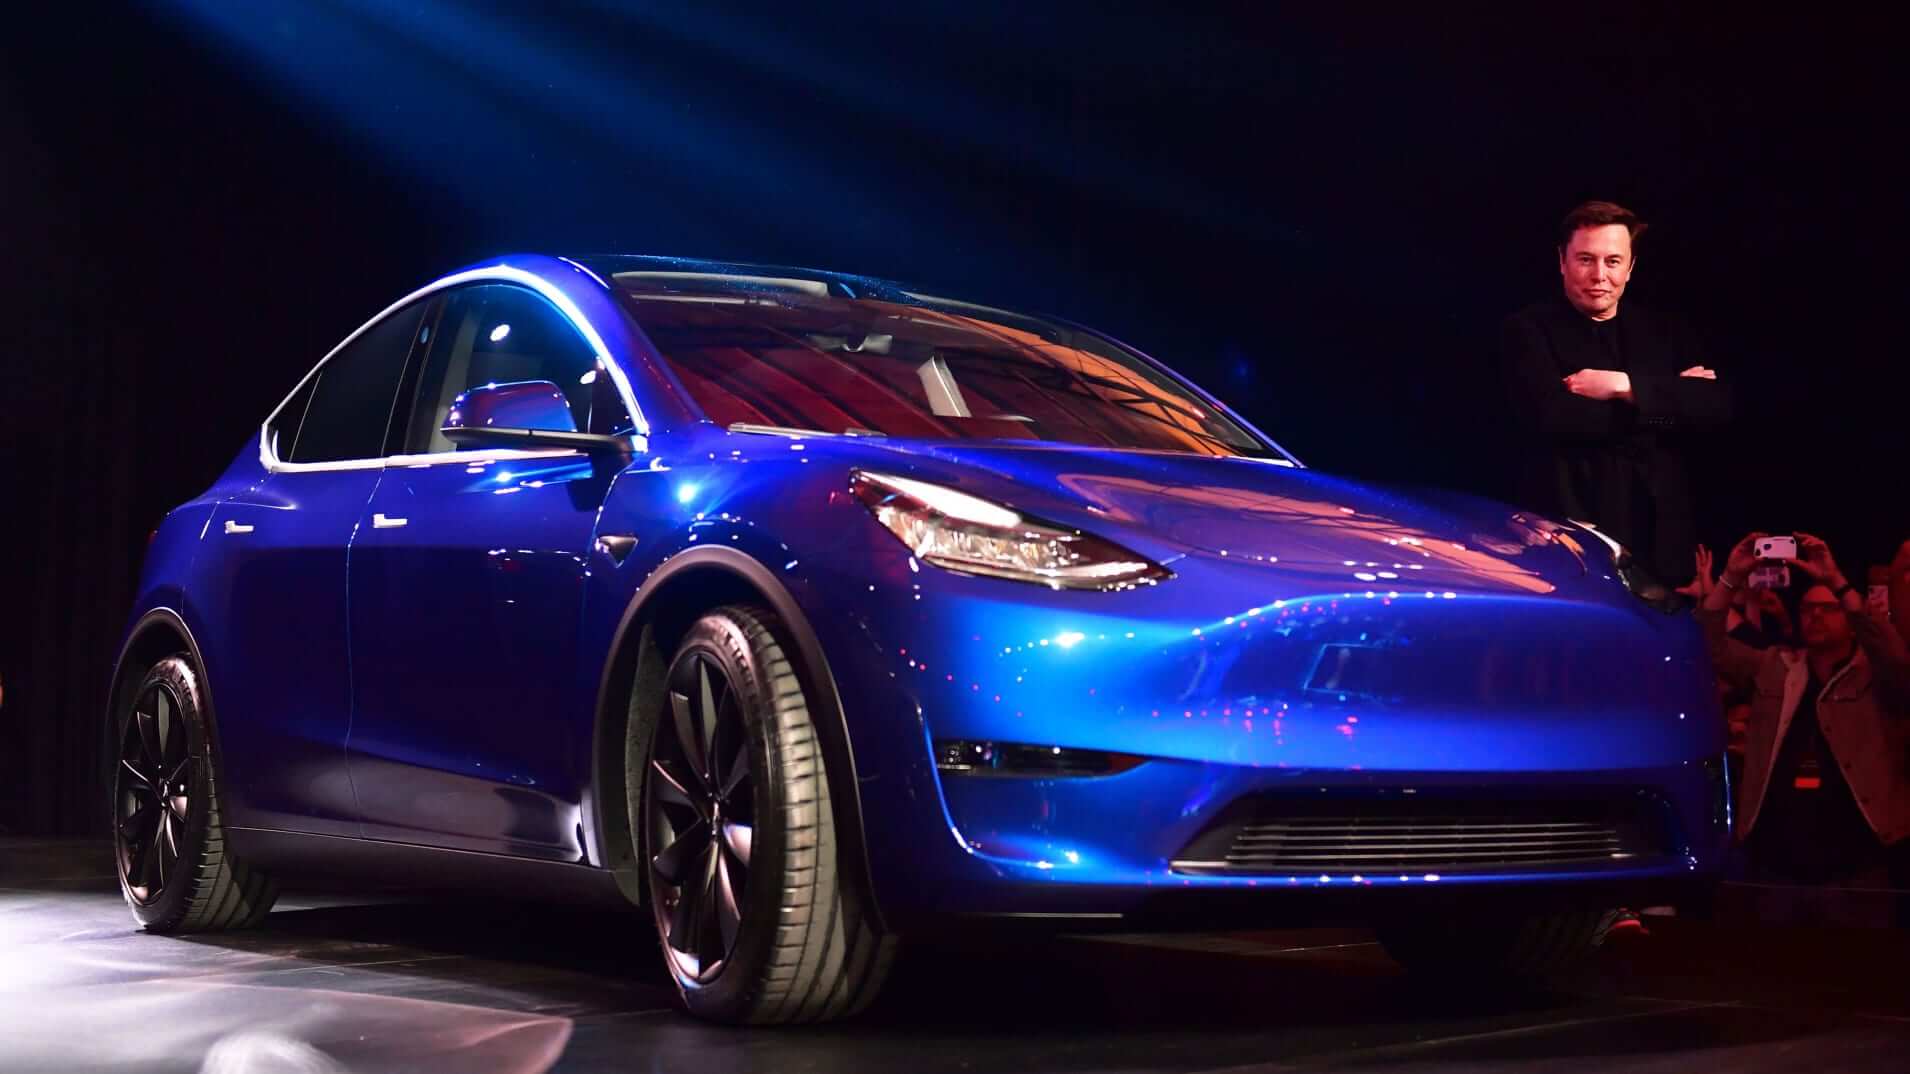 Tesla plans to start production of the Model Y in 2020